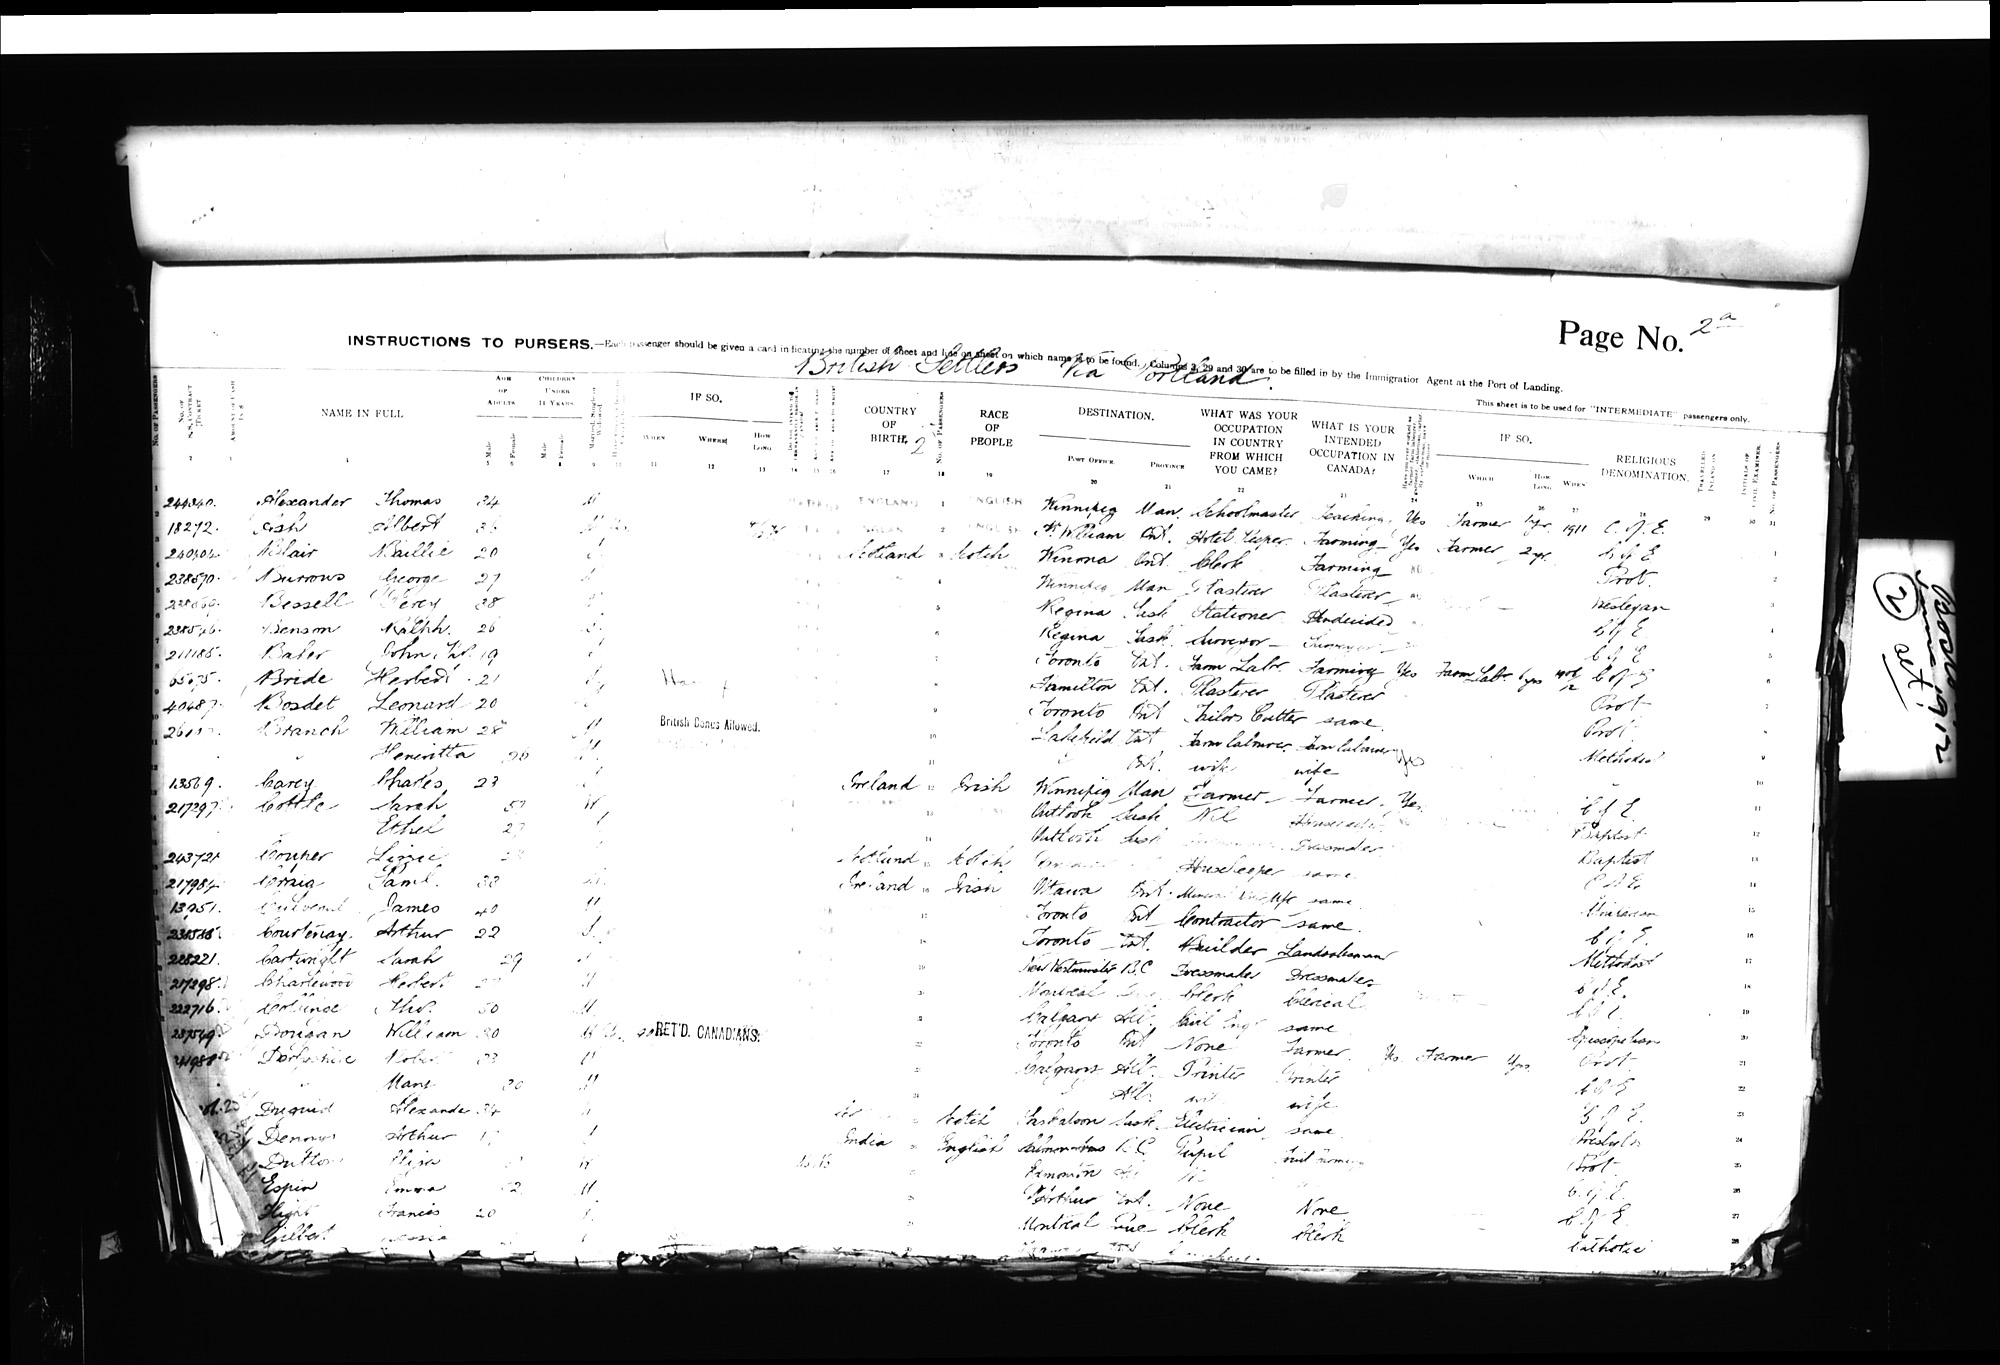 Digitized page of Passenger Lists for Image No.: CANIMM1913PLIST_0000406960-00148